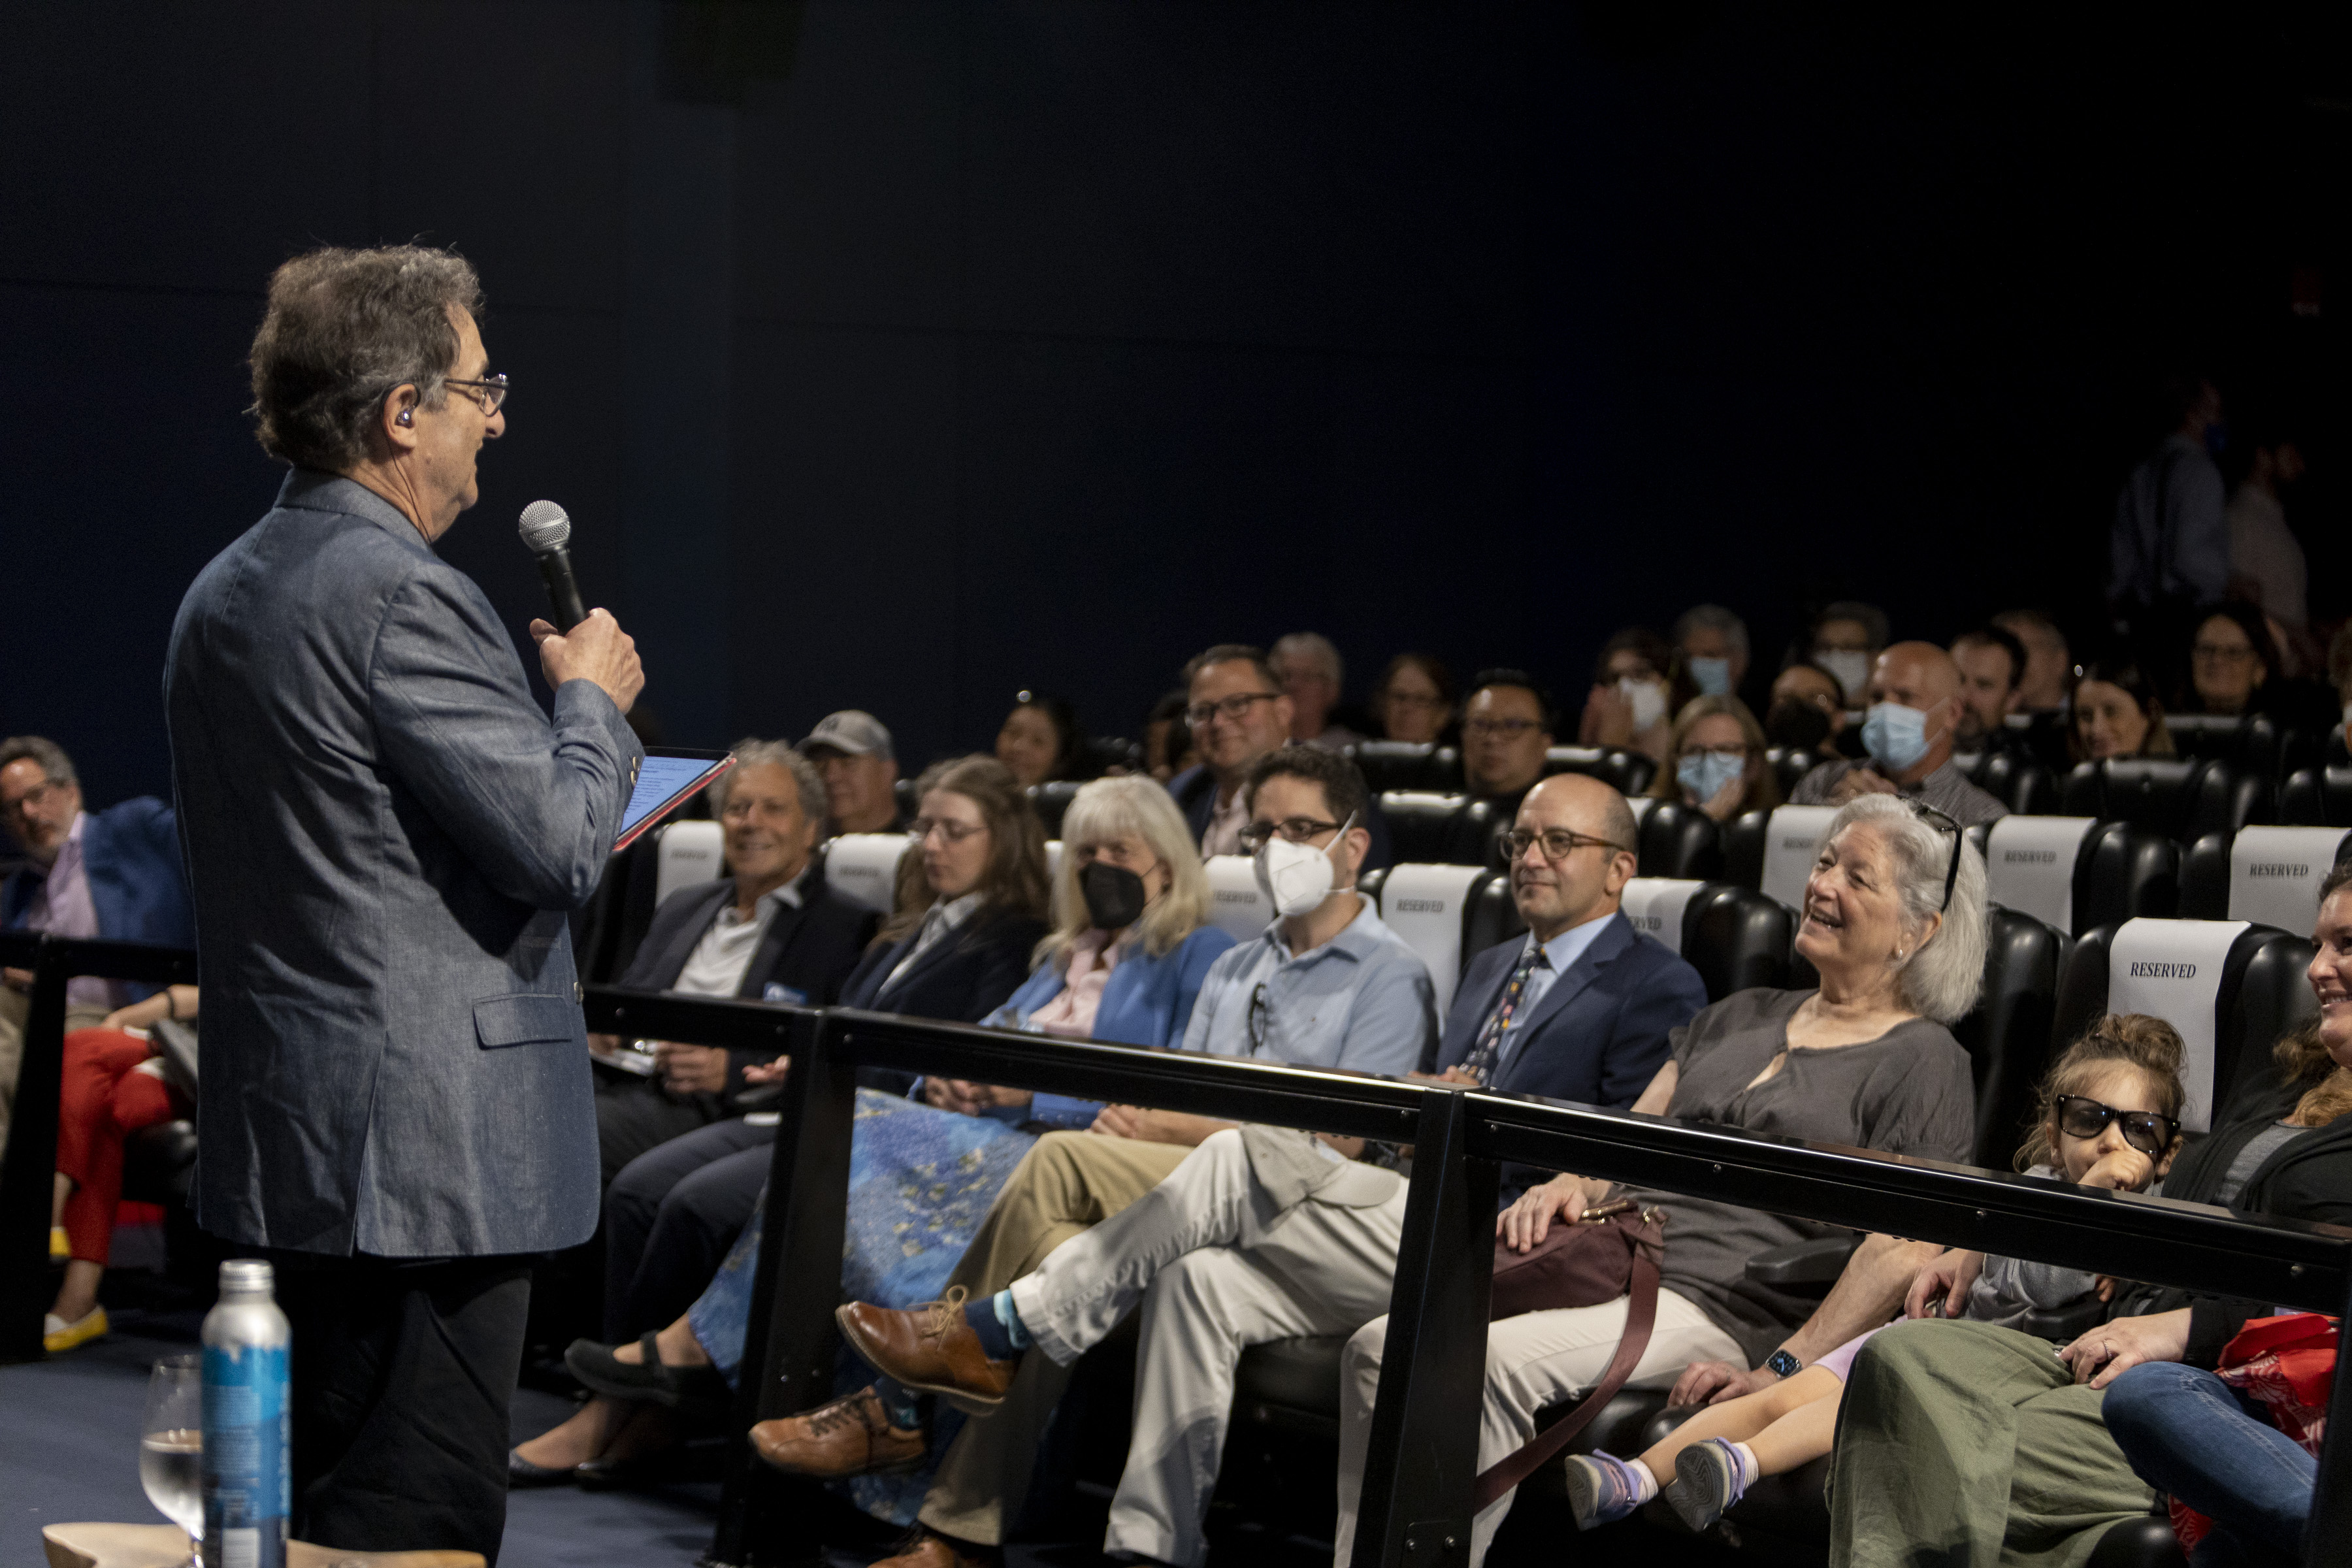 a picture taken behind ira flatow, wearing a suit jacket, speaking into a microphone addressing a smiling audience